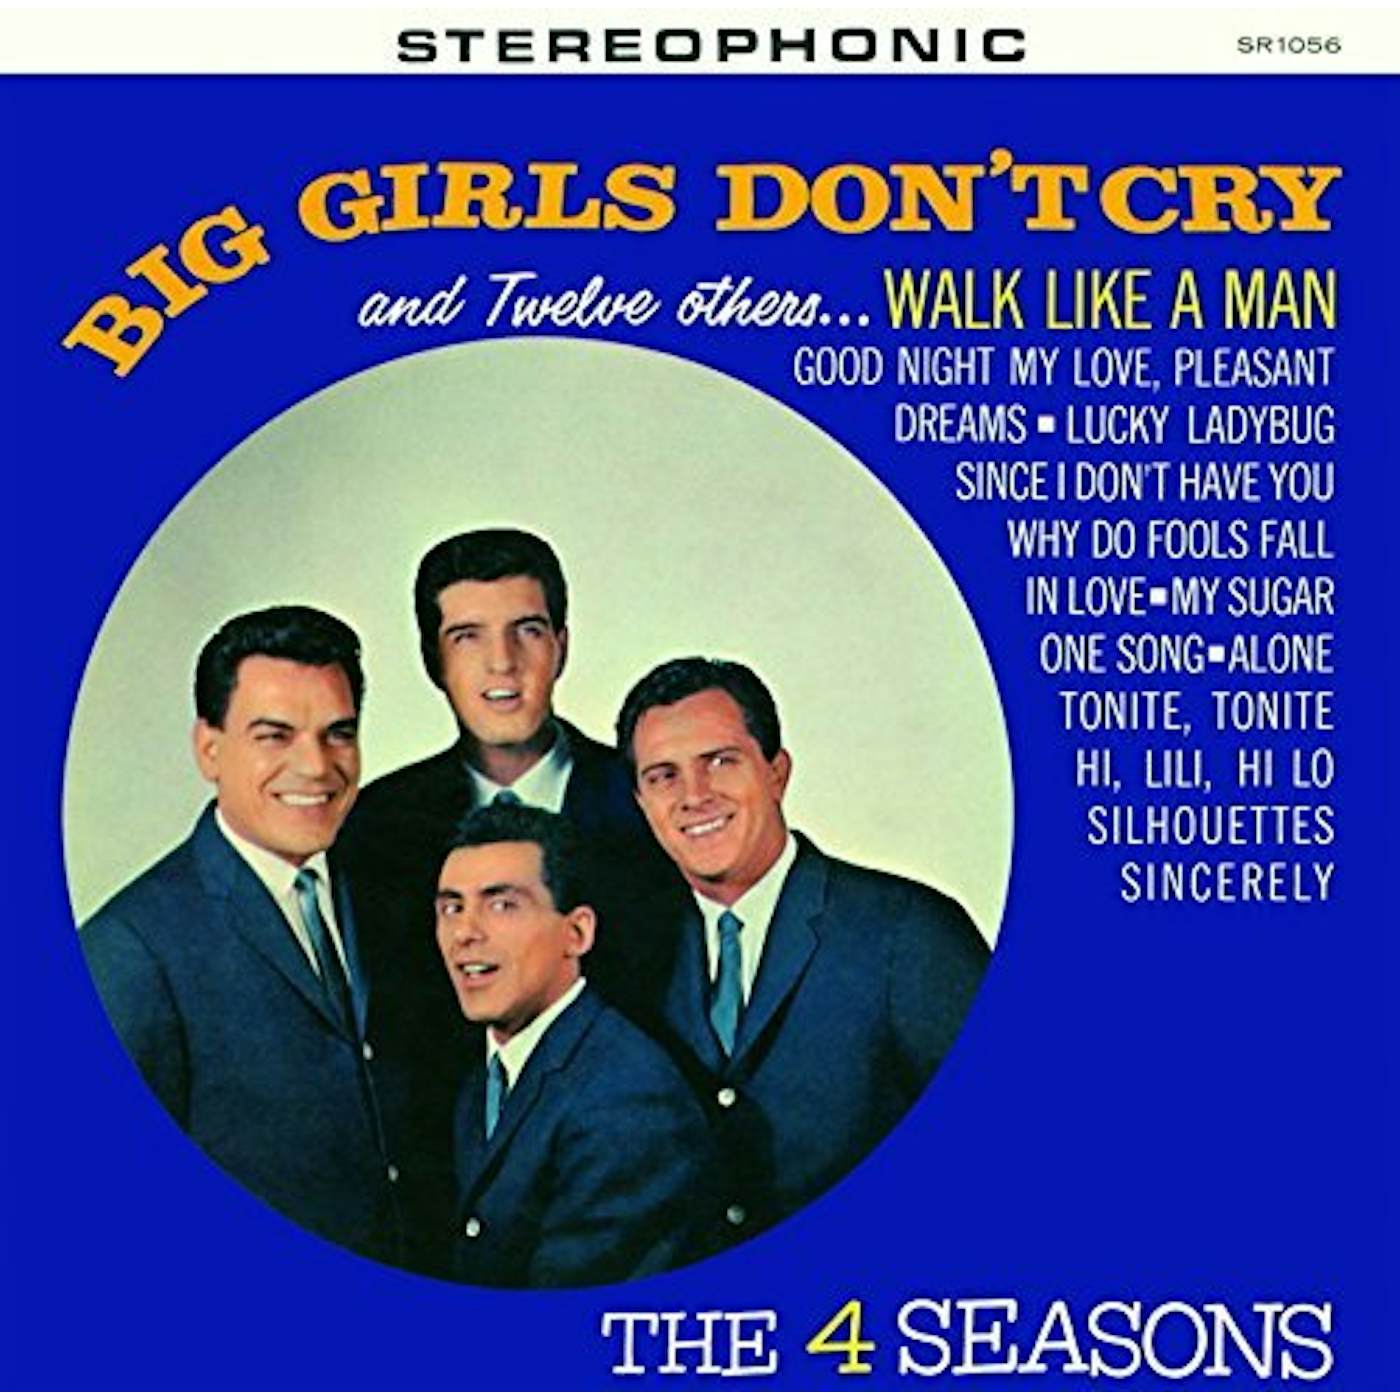 Four Seasons BIG GIRLS DON'T CRY & 12 OTHER HIT CD